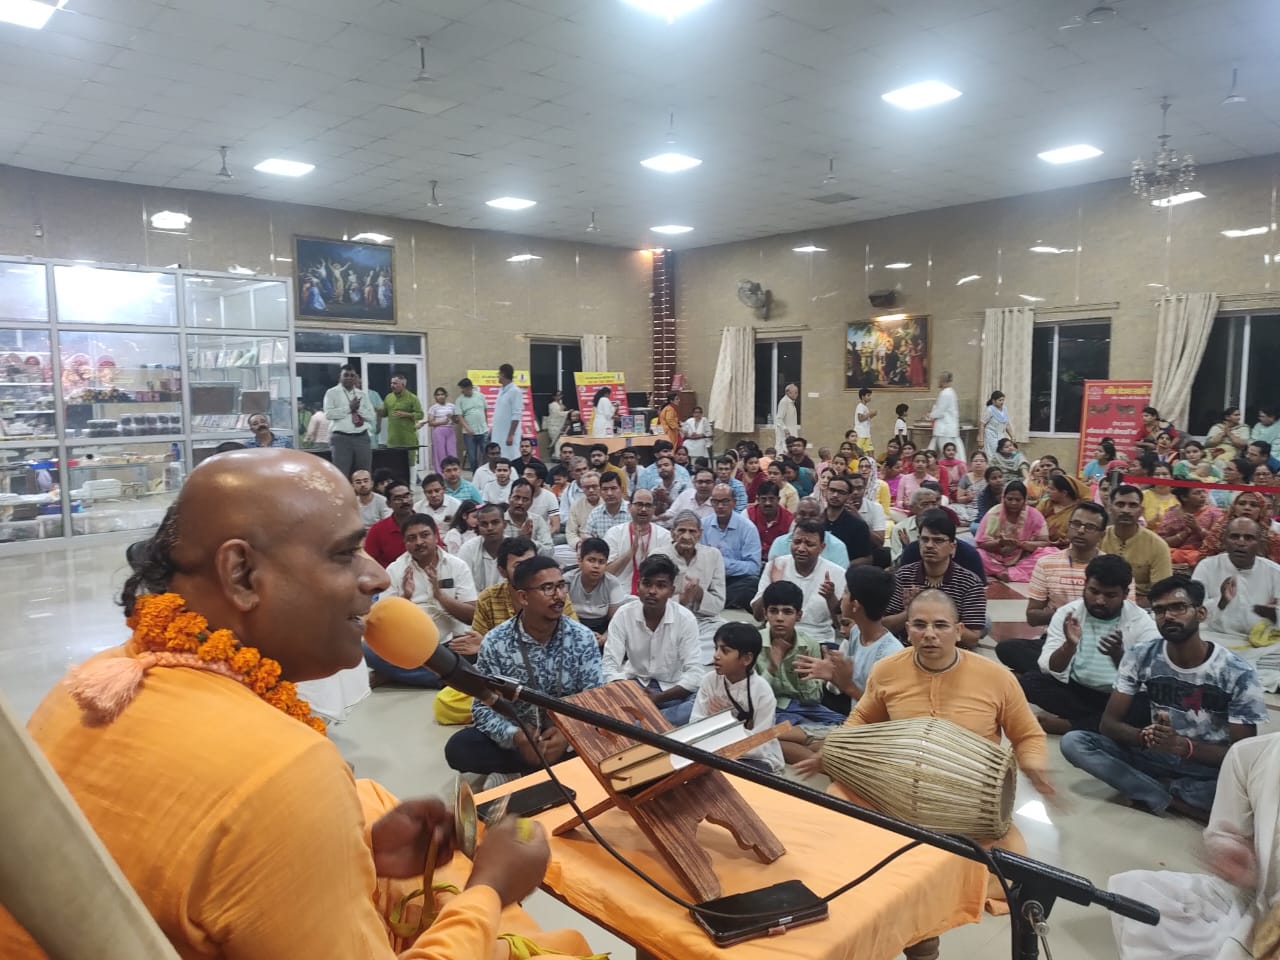 Devotees were overwhelmed with emotion after listening to Srimad Bhagavatam in ISKCON Lucknow.